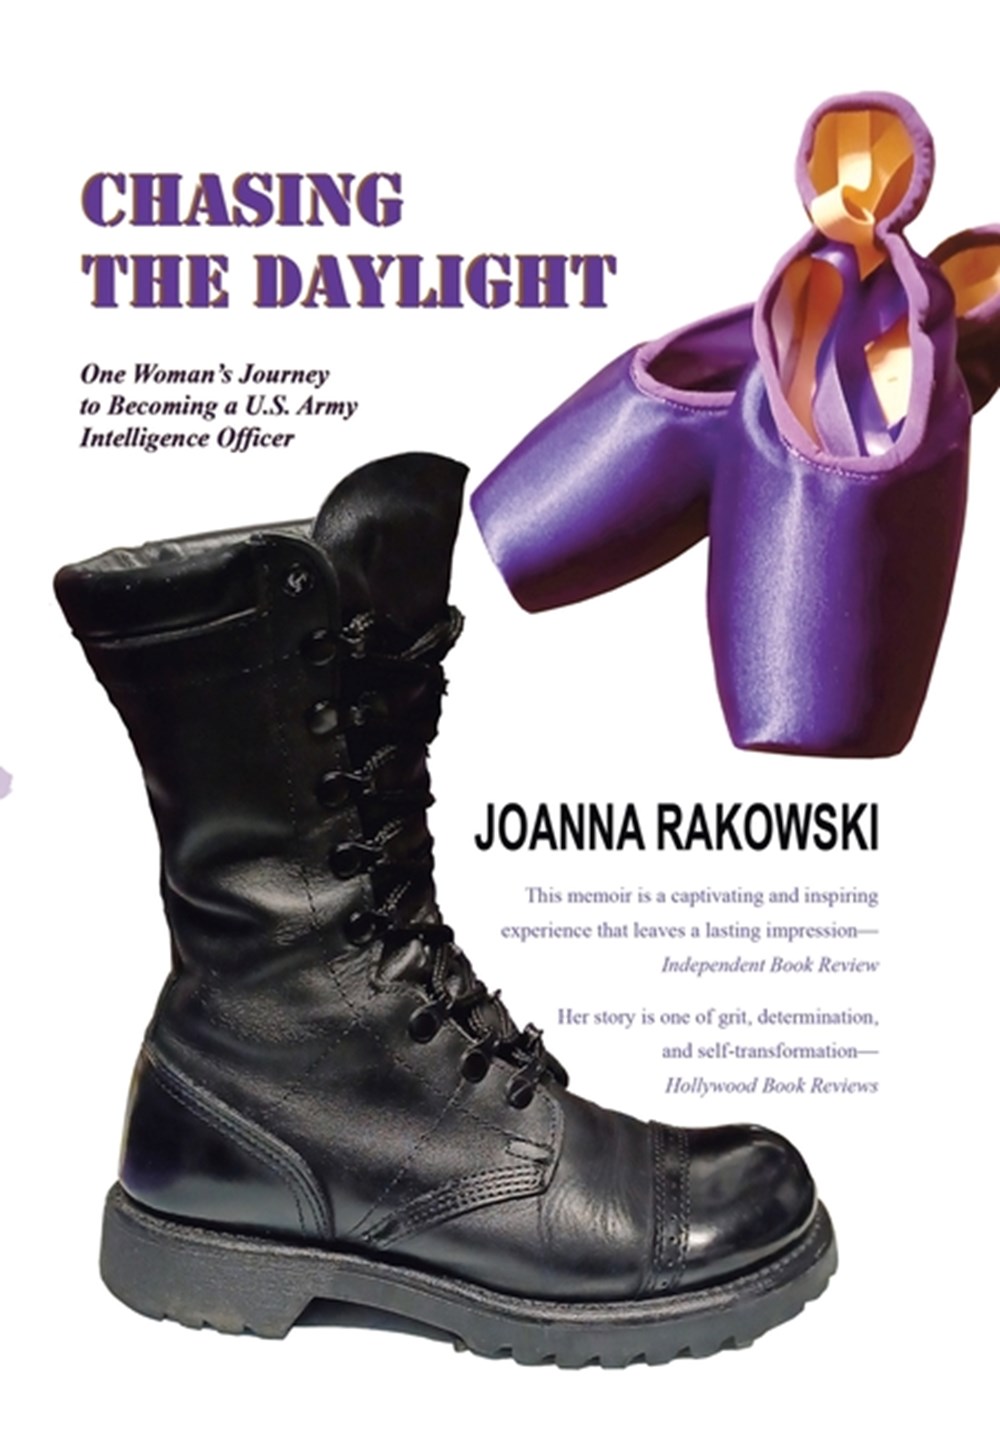 Chasing the Daylight: One Woman's Journey to Becoming a U.S. Army Intelligence Officer